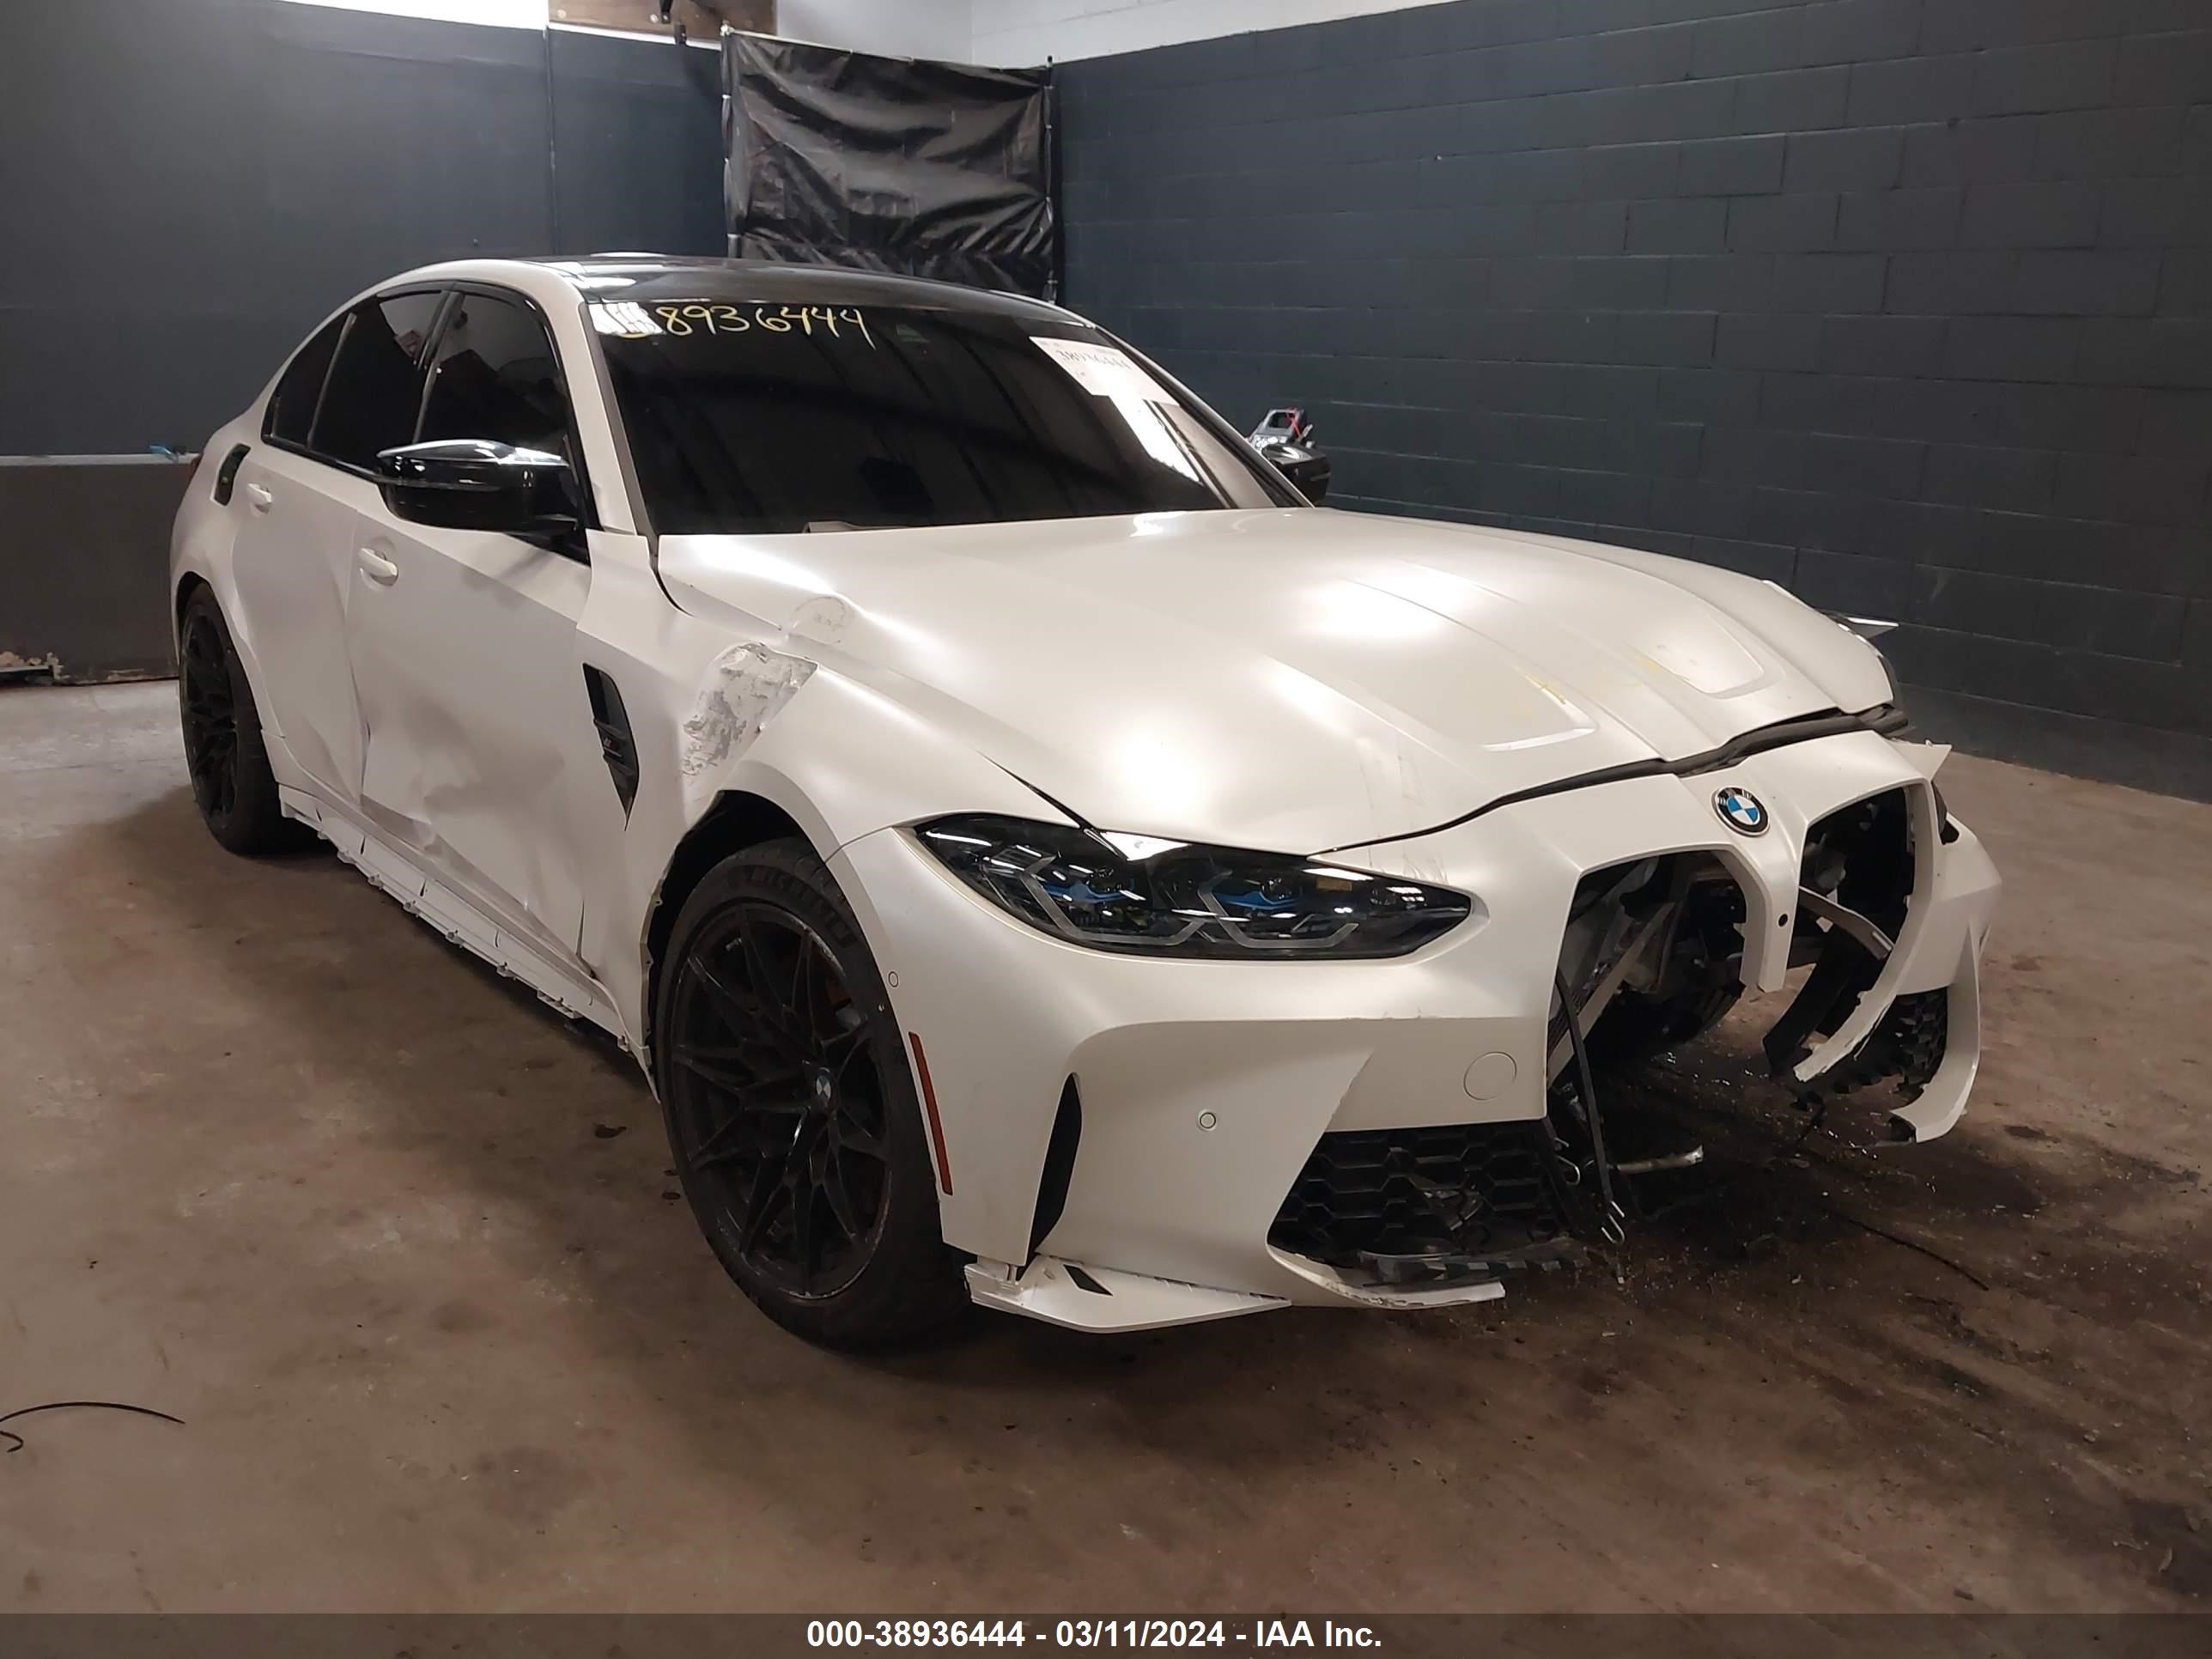 vin: WBS43AY05RFS24225 WBS43AY05RFS24225 2024 bmw m3 3000 for Sale in 11763, 66 Peconic Ave, Medford, New York, USA